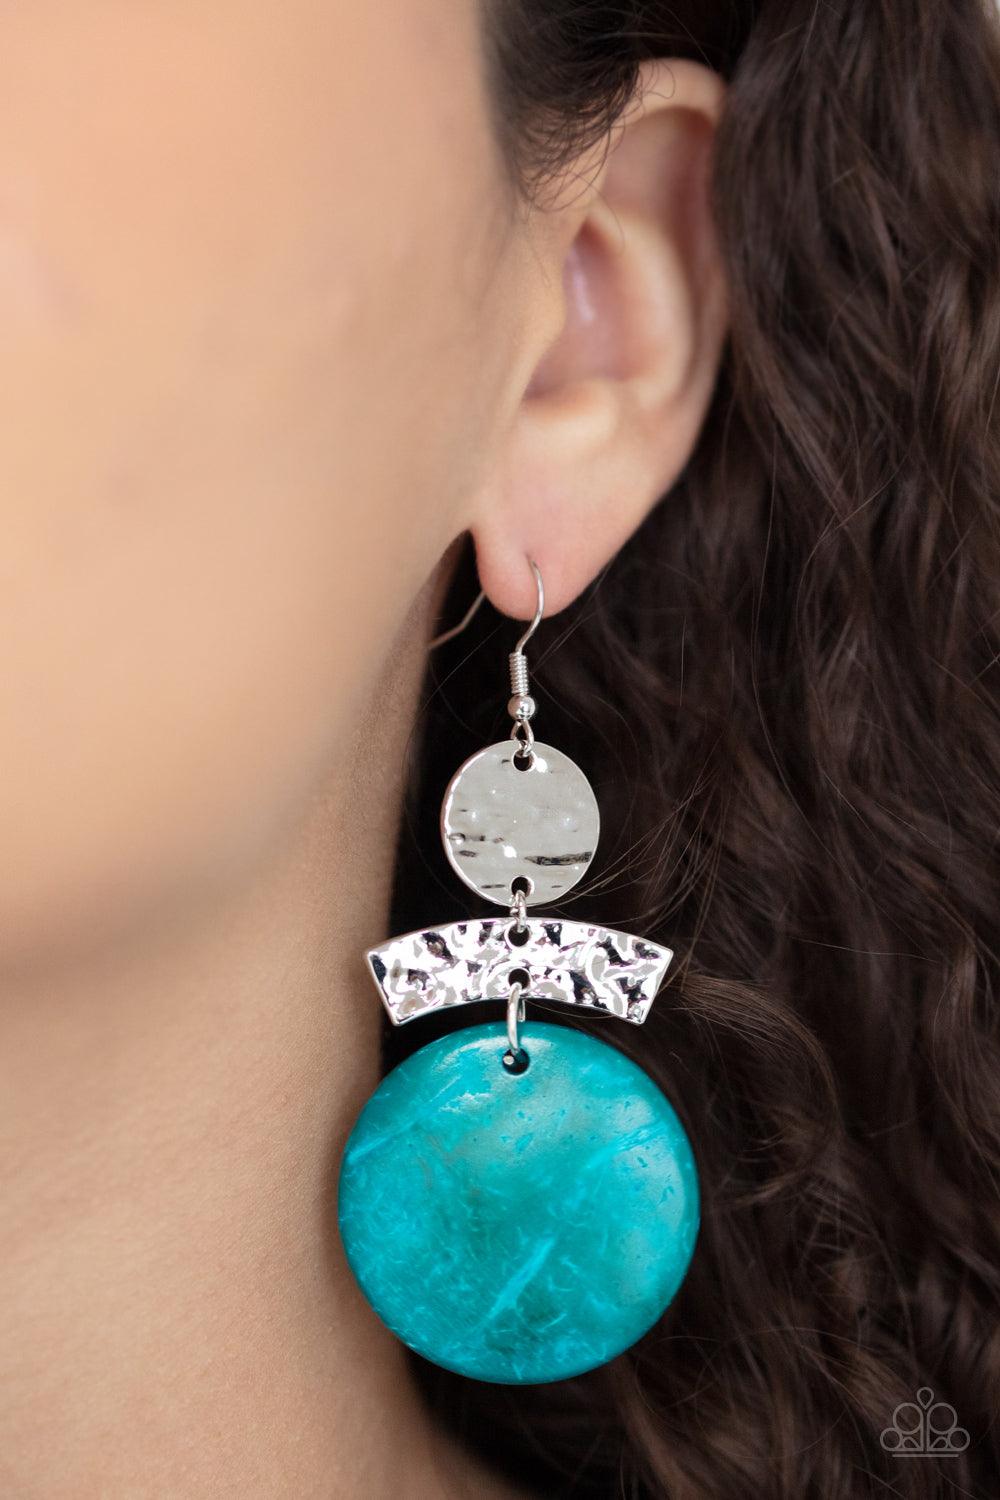 Paparazzi Accessories Diva Of My Domain - Blue Featuring a distressed blue finish, a wooden disc swings from the bottom of a hammered curved plate and hammered silver disc, coalescing into an earthy lure. Earring attaches to a standard fishhook fitting. S